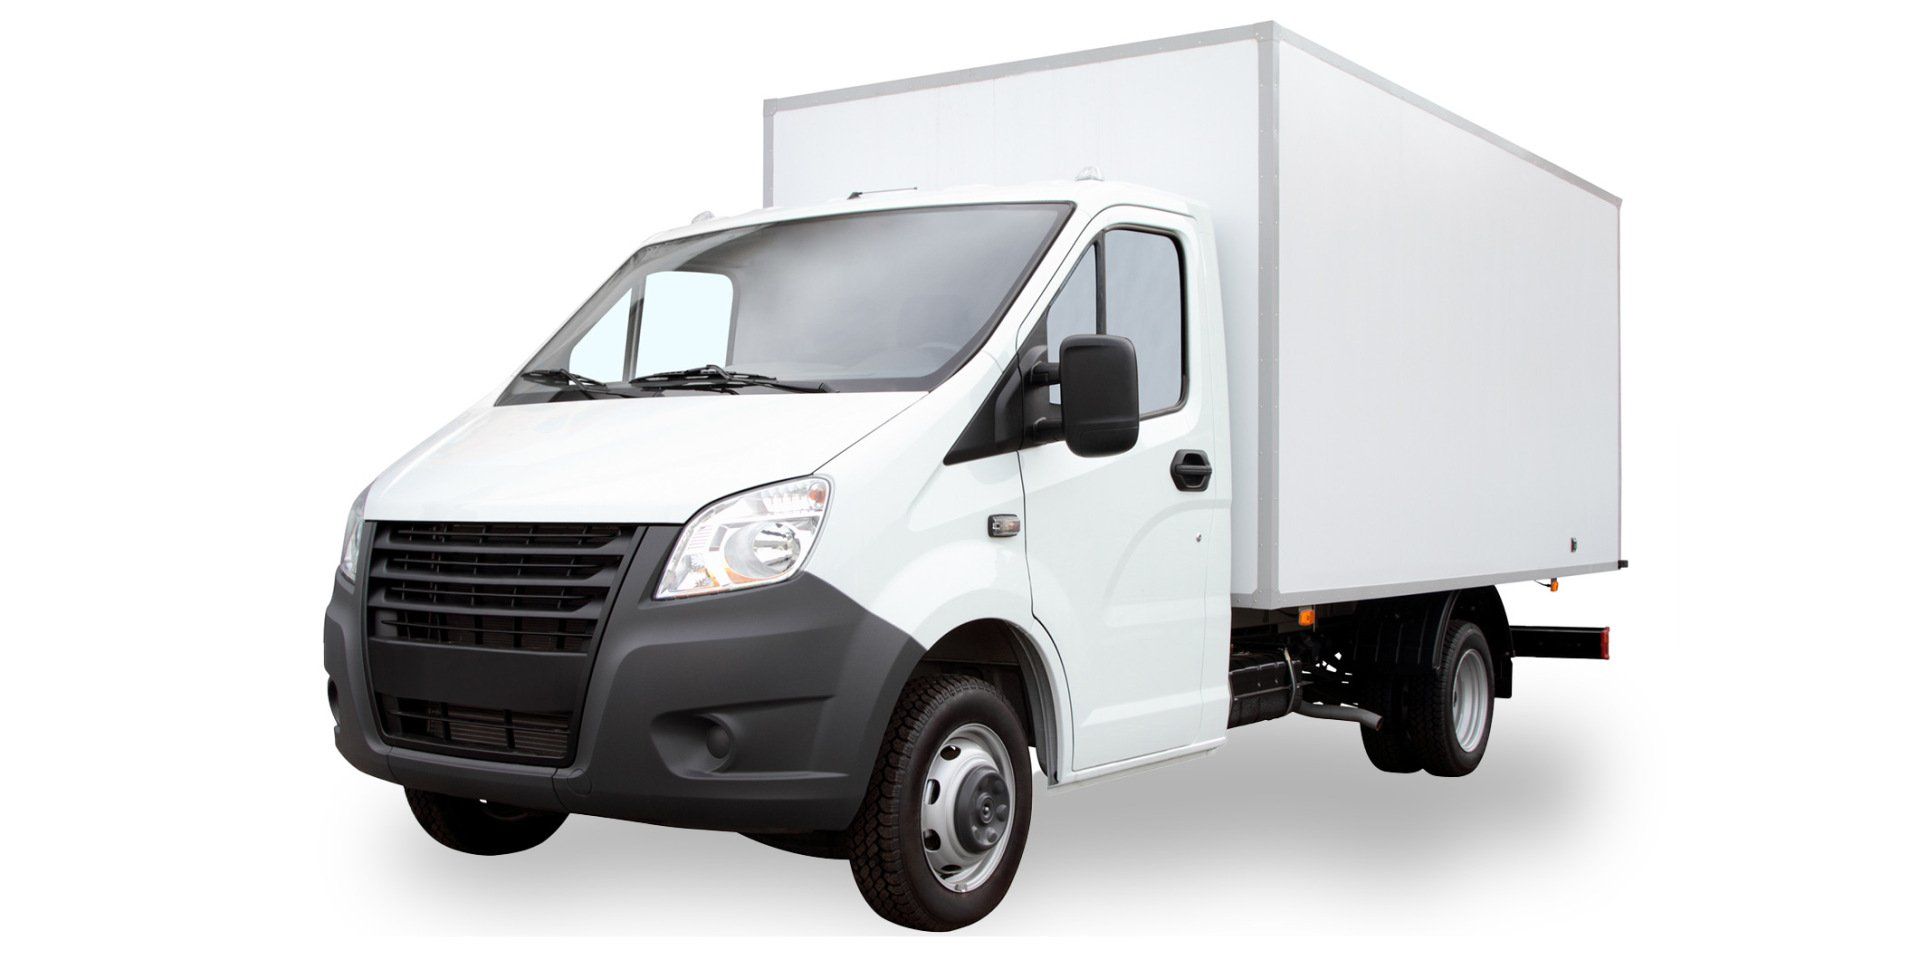 White Delivery Truck - Arlington, TX - See The Fleet